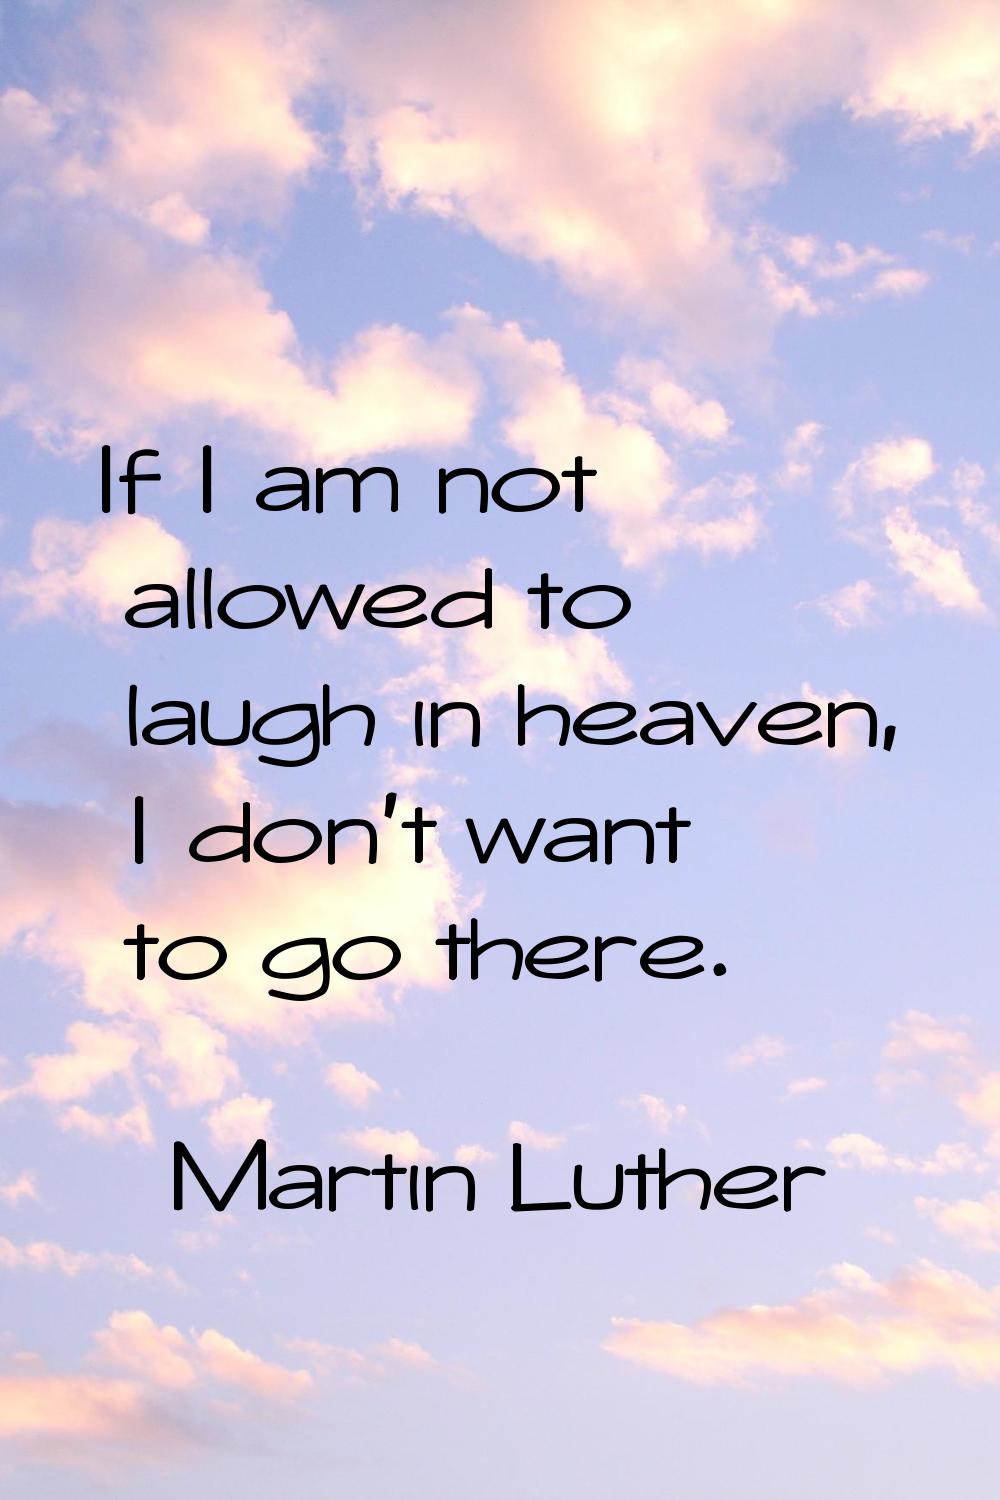 If I am not allowed to laugh in heaven, I don't want to go there.